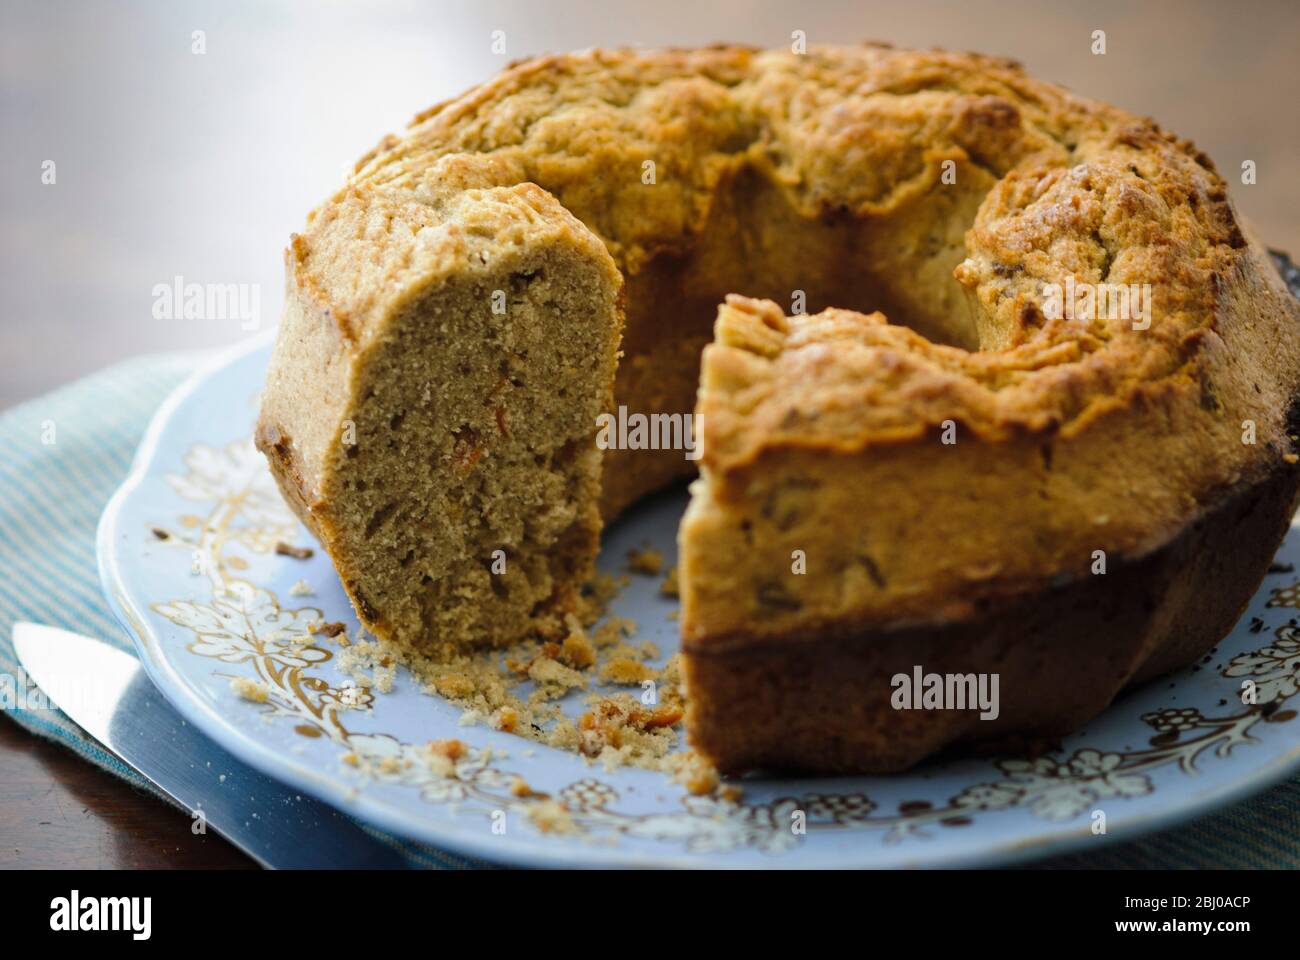 Carrot cake made from gluten free cake mix, baked n a ring tin Stock Photo